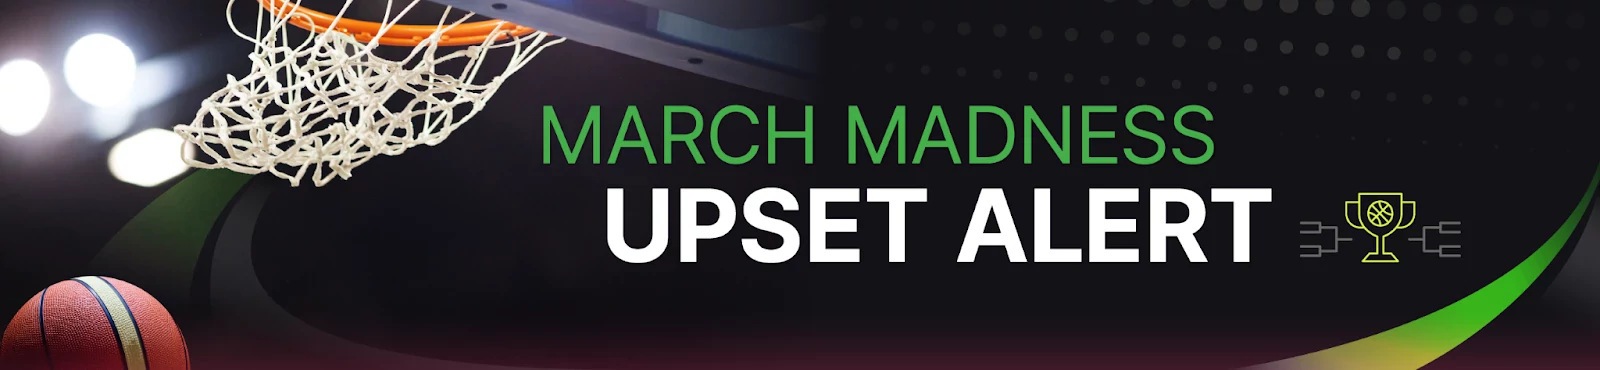 Analysis of NCAA Basketball March Madness Upsets and Bracket Busters